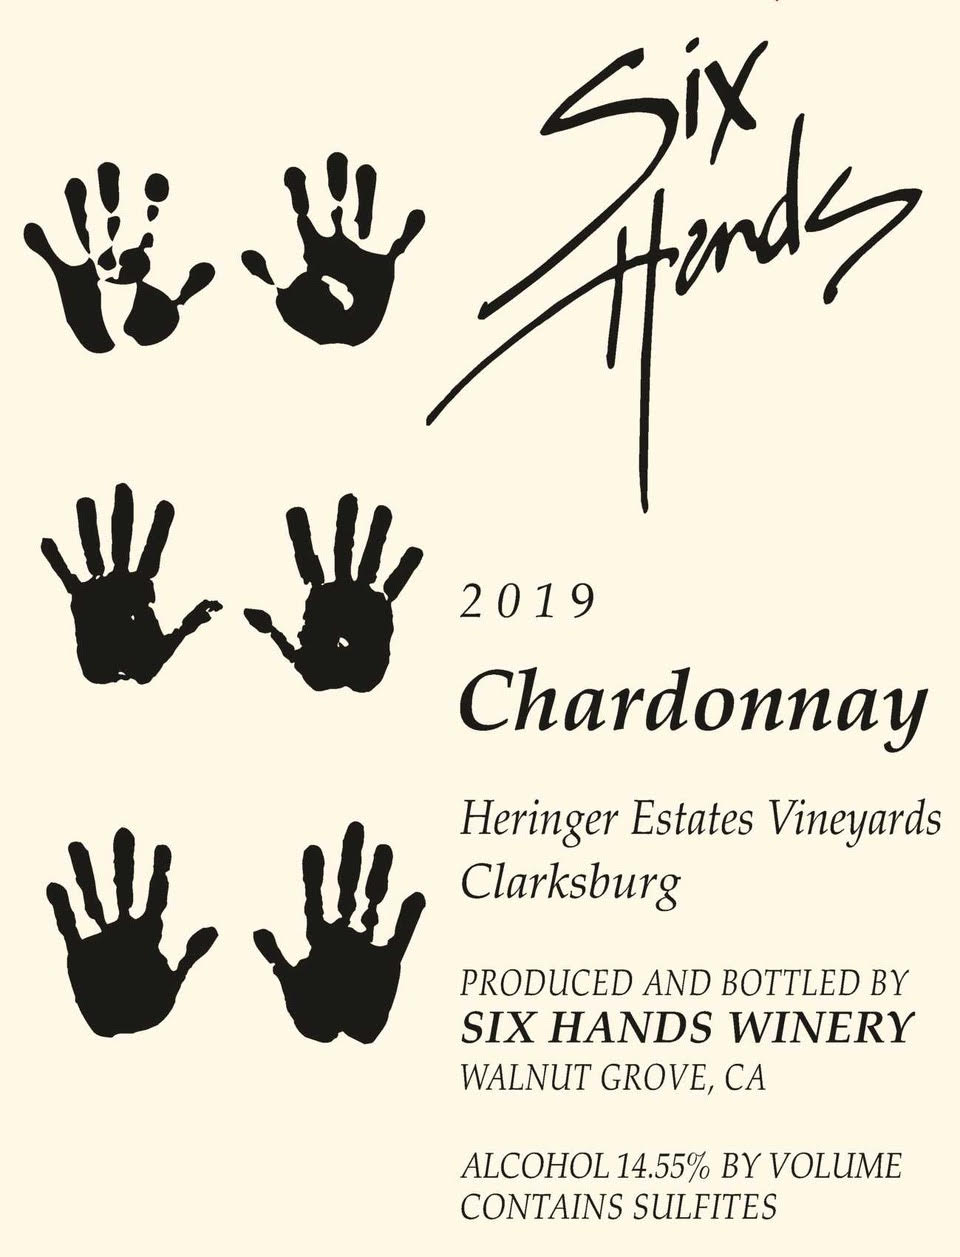 Six Hands - 2019 Chardonnay. Heringer Estates Vineyards Clarksburg. Produced and bottled by SIX HANDS WINERY Walnut Grove, CA. Alcohol 14.55% by volume contains sulfites.